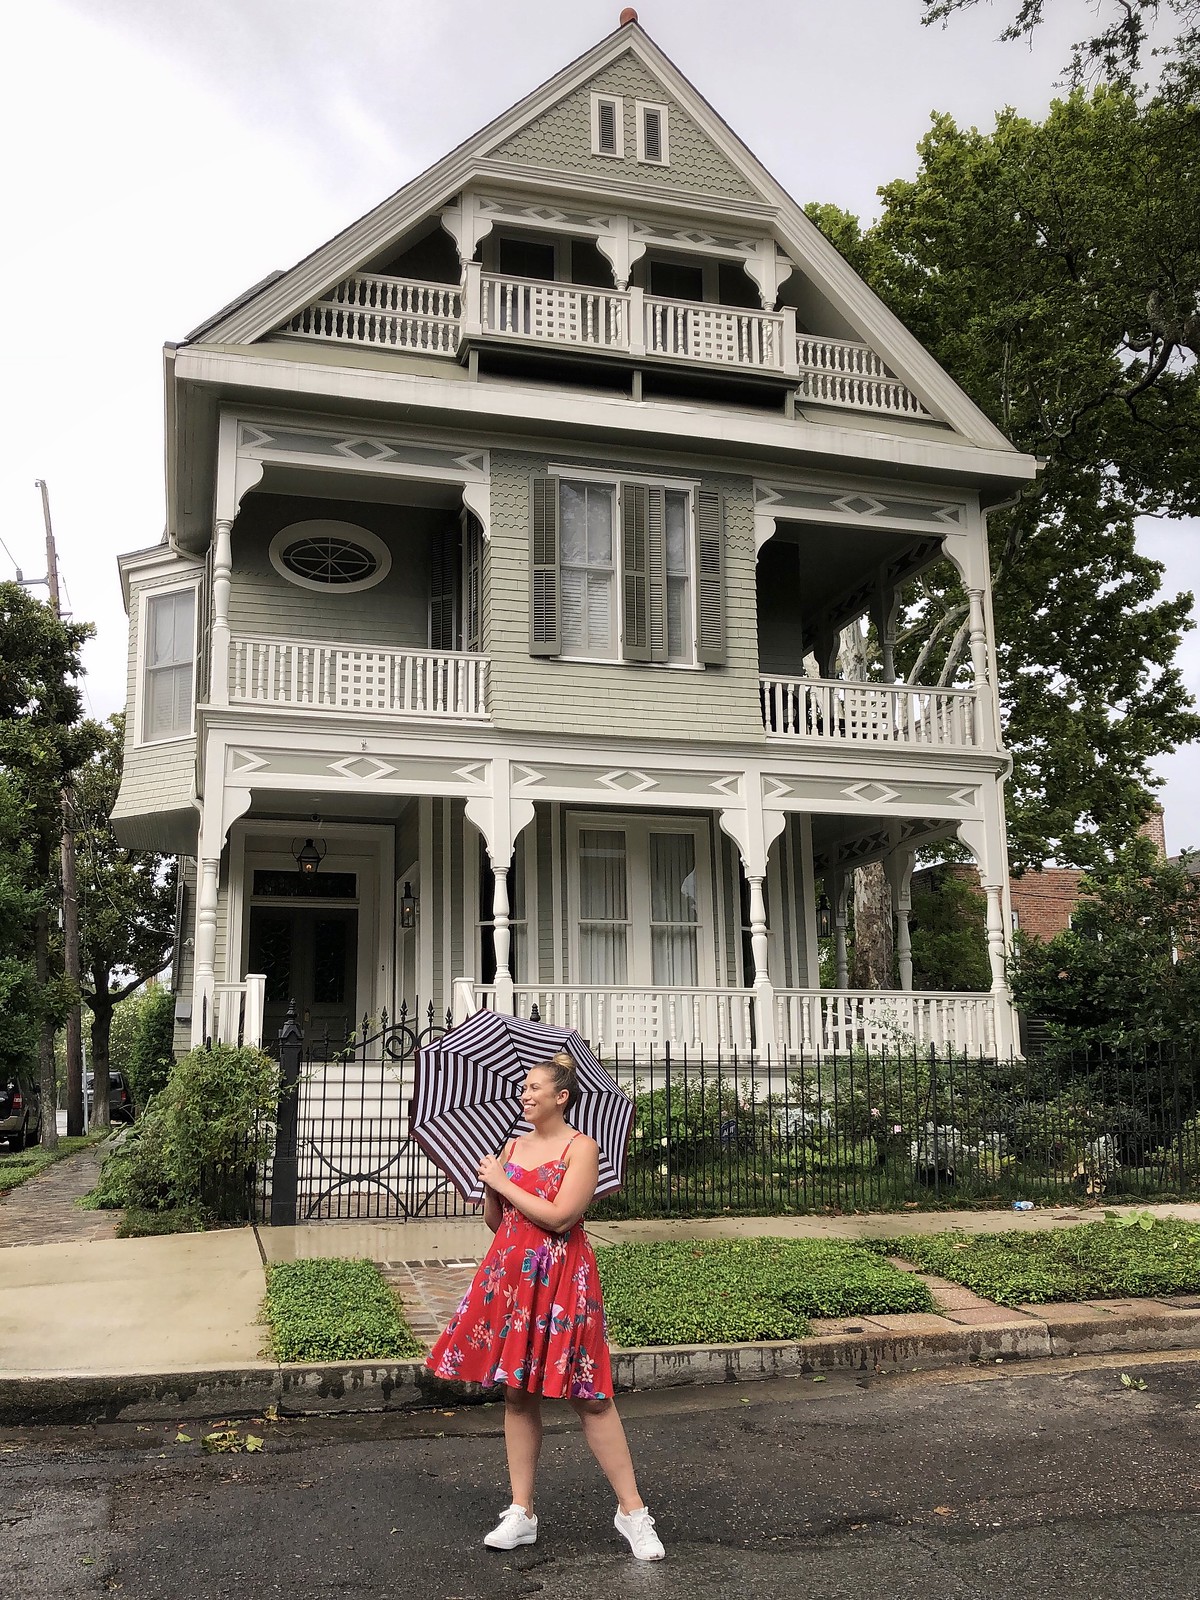 Garden District | How to Spend 48 Hours in New Orleans in the Summer | New Orleans Travel Guide | What to do in New Orleans | 2 Days in New Orleans | Best Things to do in New Orleans | First Timer’s Guide to NOLA | NOLA Travel Guide | 2 Day Itinerary for New Orleans